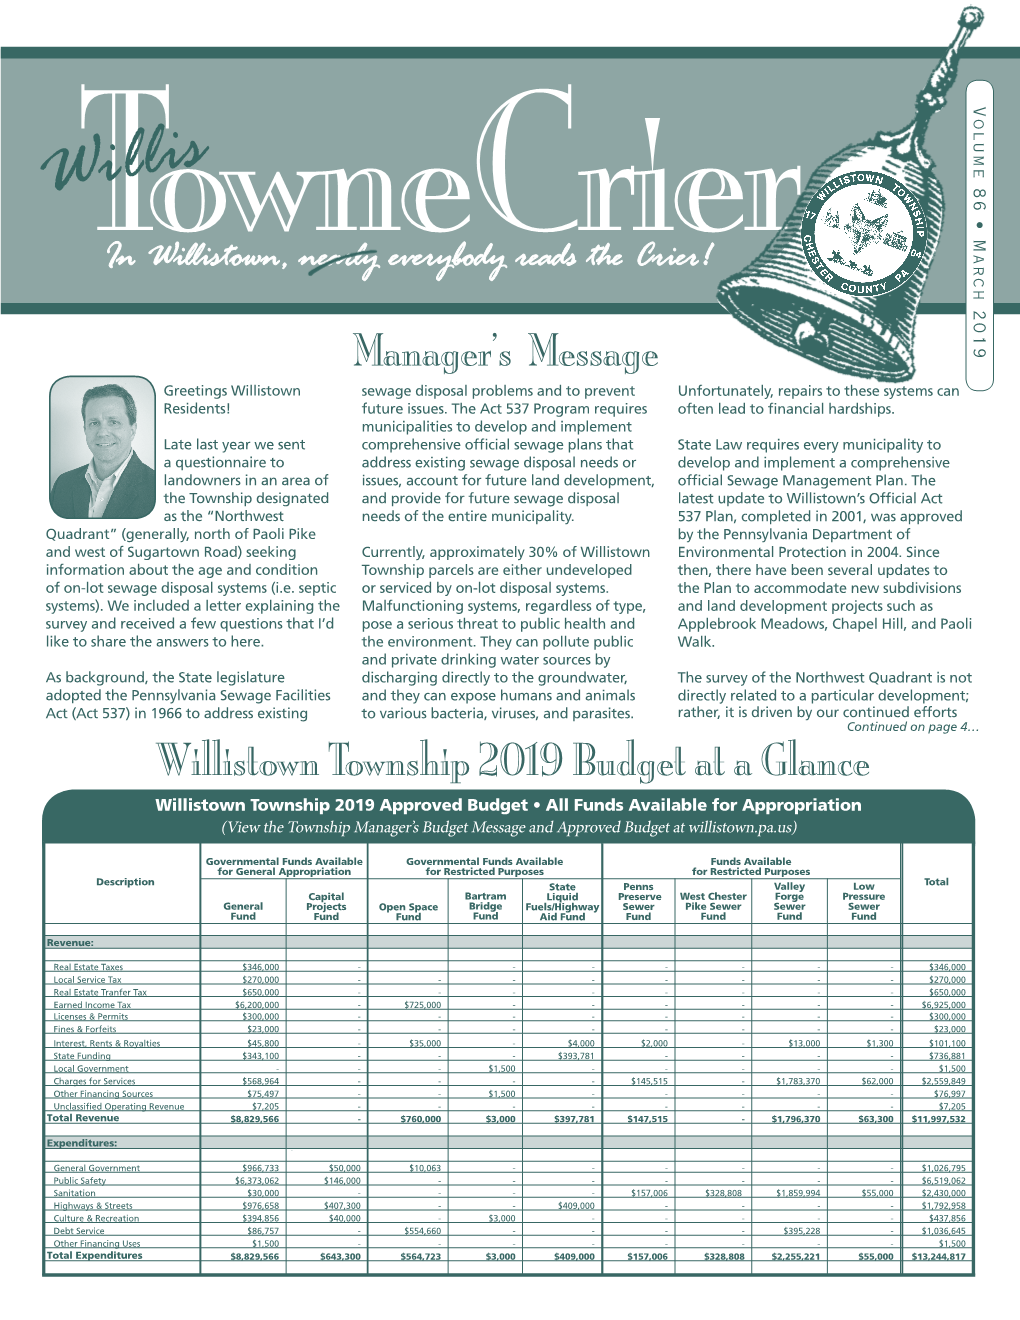 Manager's Message Willistown Township 2019 Budget at a Glance